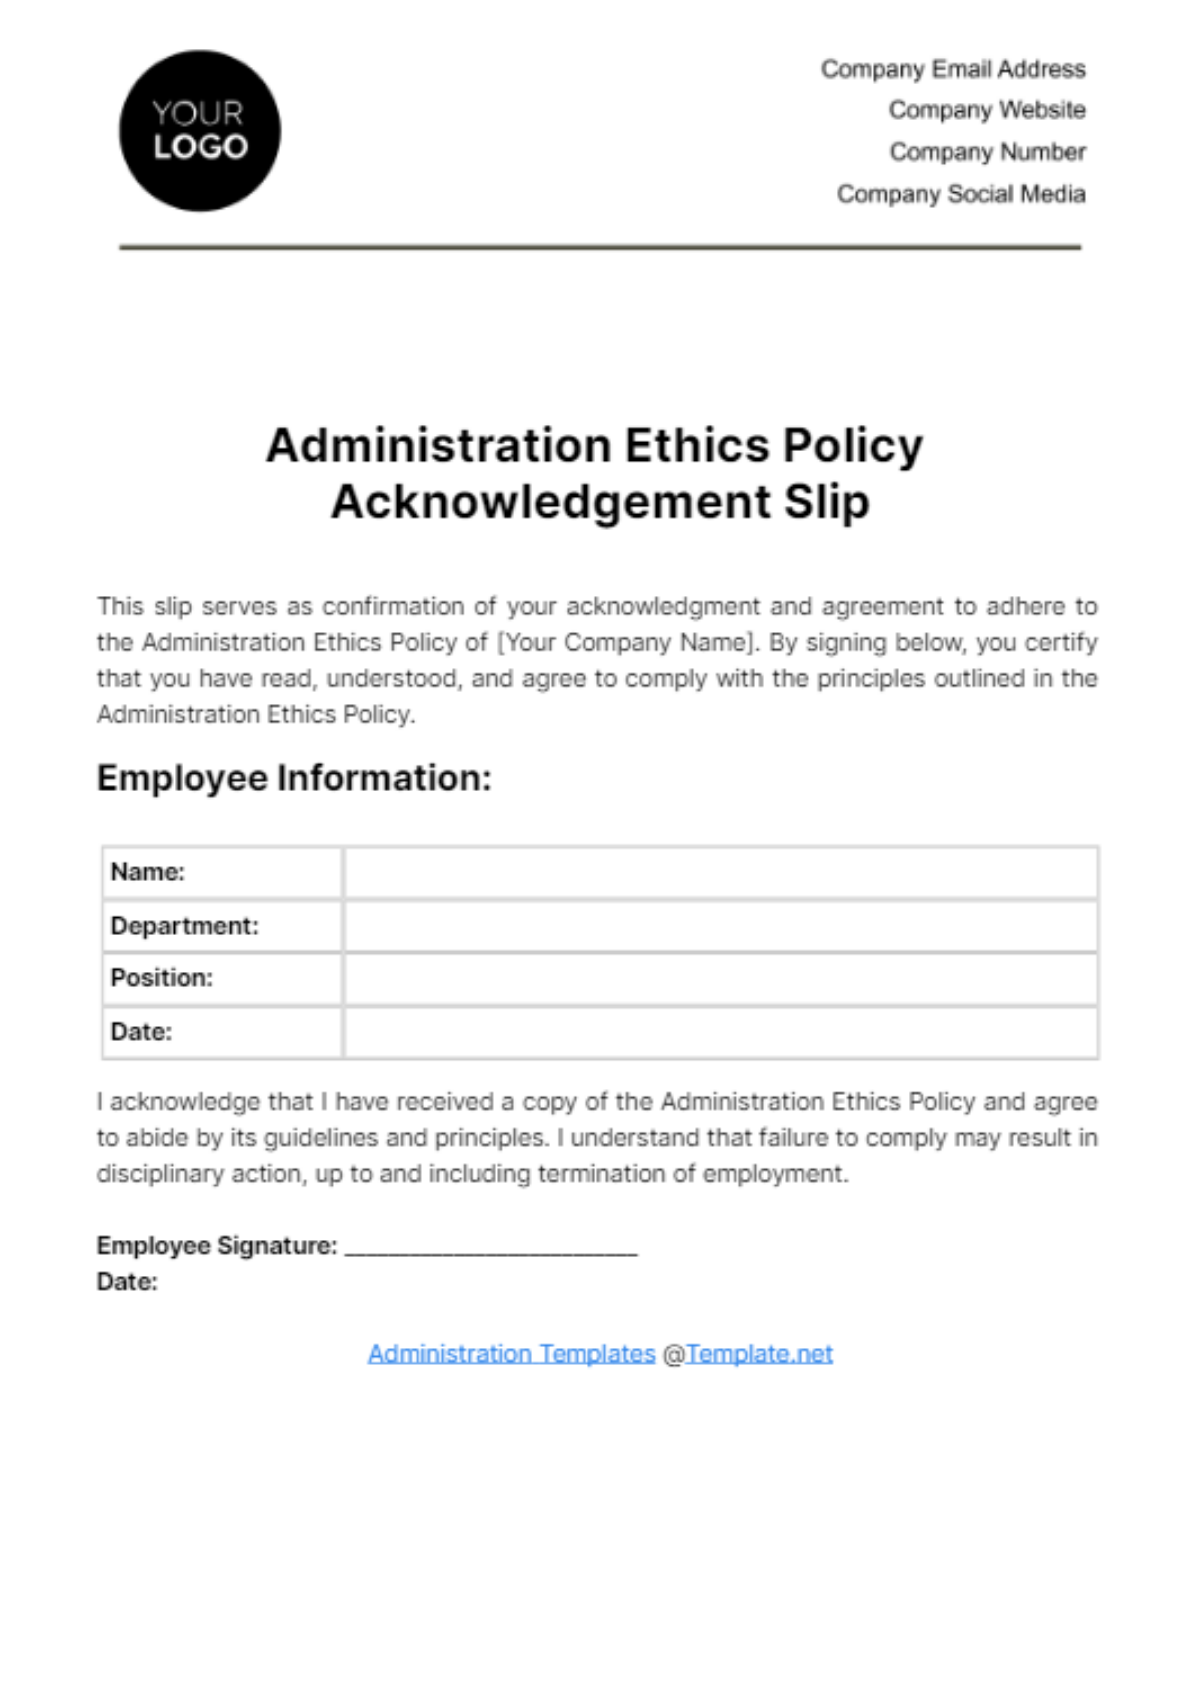 Free Administration Ethics Policy Acknowledgment Slip Template